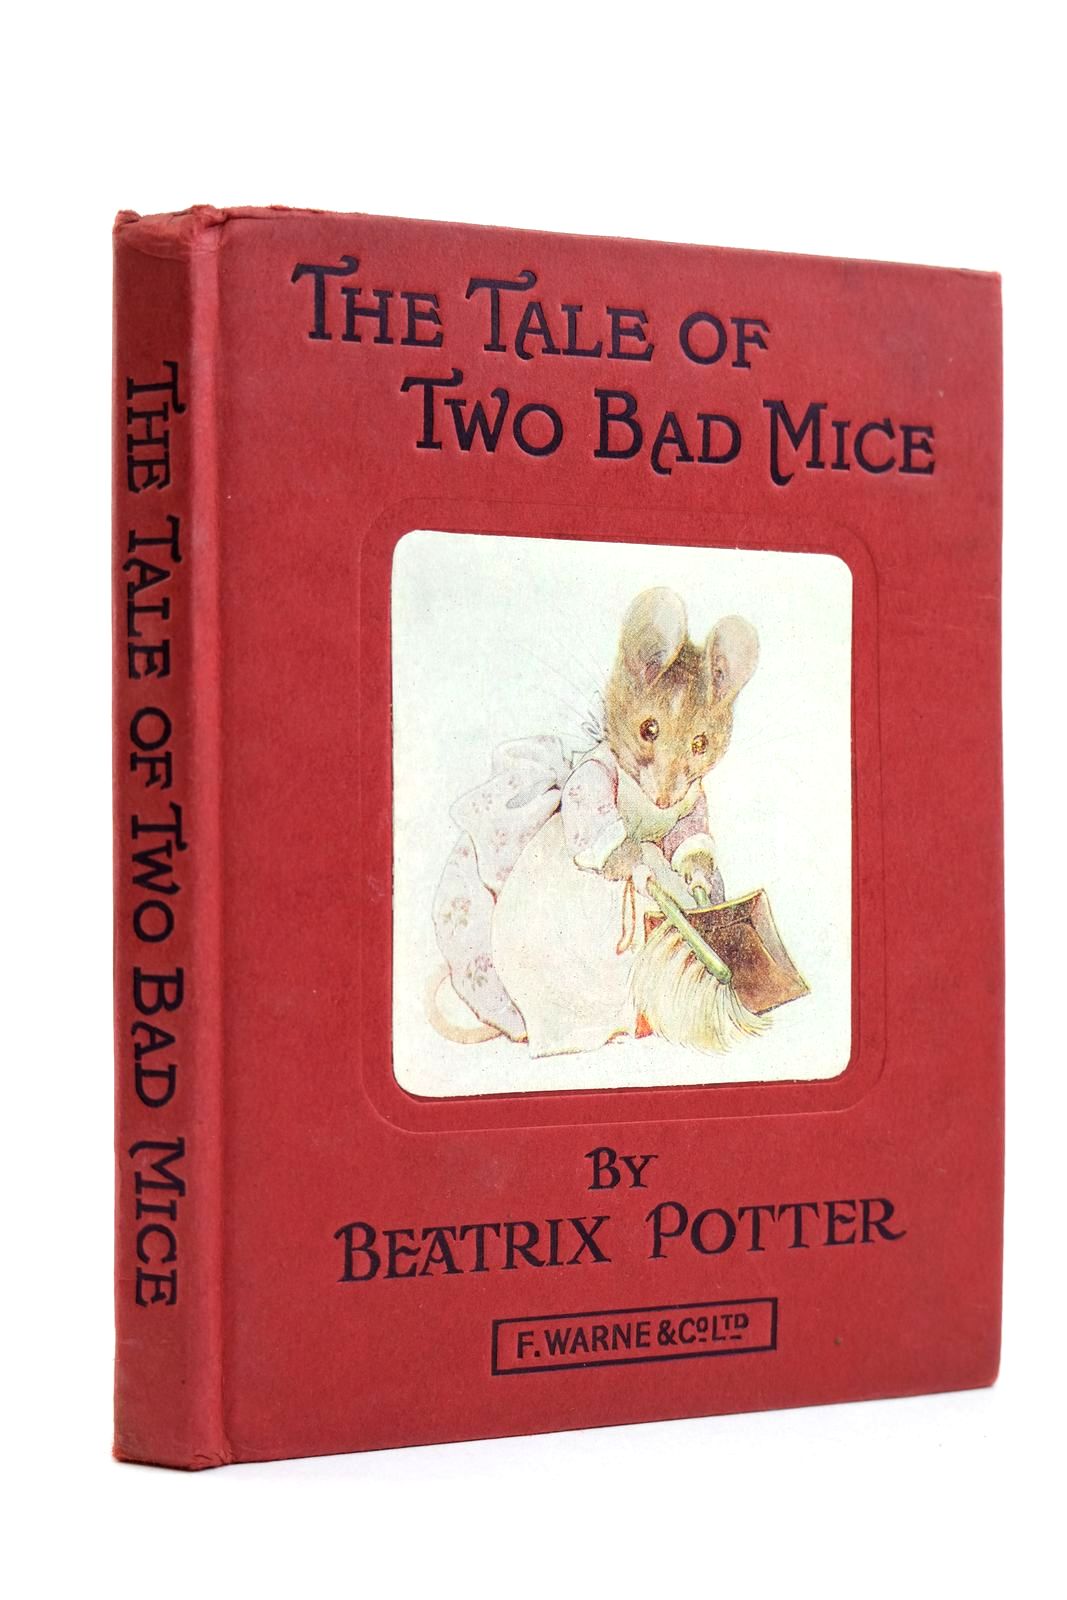 Photo of THE TALE OF TWO BAD MICE written by Potter, Beatrix illustrated by Potter, Beatrix published by Frederick Warne & Co Ltd. (STOCK CODE: 2131891)  for sale by Stella & Rose's Books